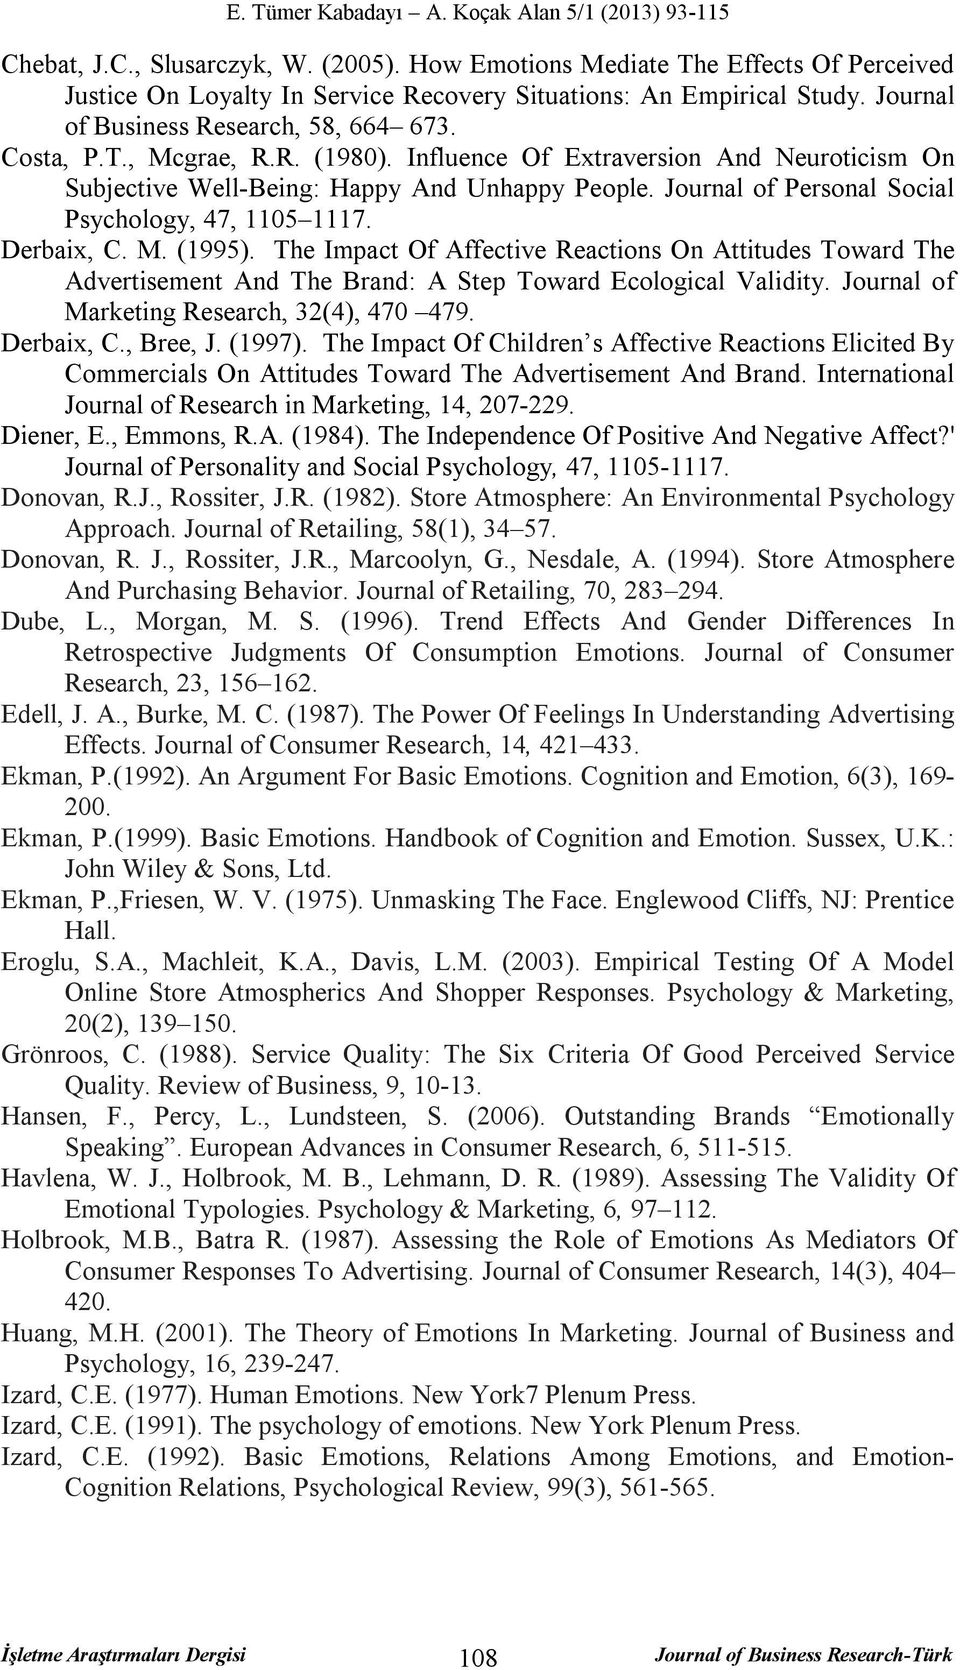 The Impact Of Affective Reactions On Attitudes Toward The Advertisement And The Brand: A Step Toward Ecological Validity. Journal of Marketing Research, 32(4), 470 479. Derbaix, C., Bree, J. (1997).